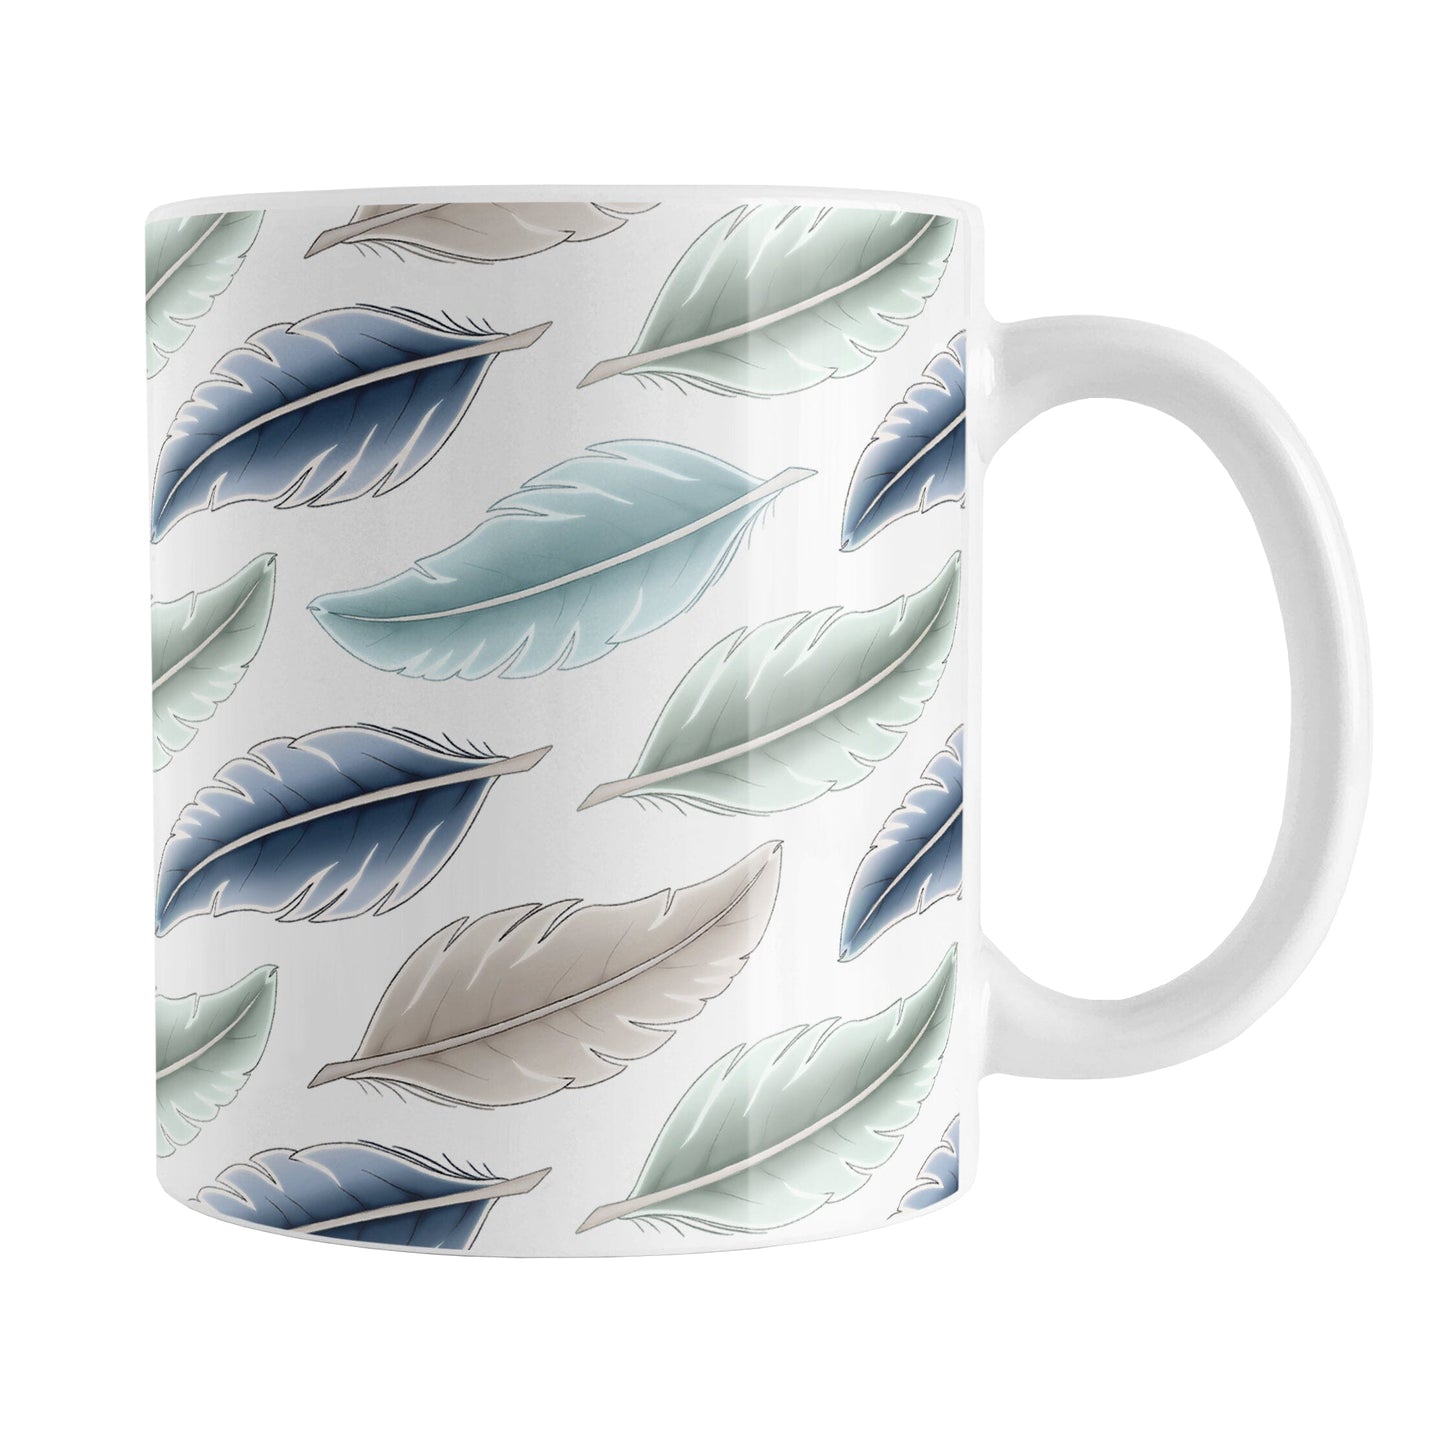 Coastal Feathers Mug (11oz) at Amy's Coffee Mugs. A ceramic coffee mug designed with a pattern of feathers in a coastal color scheme that wraps around the mug to the handle.